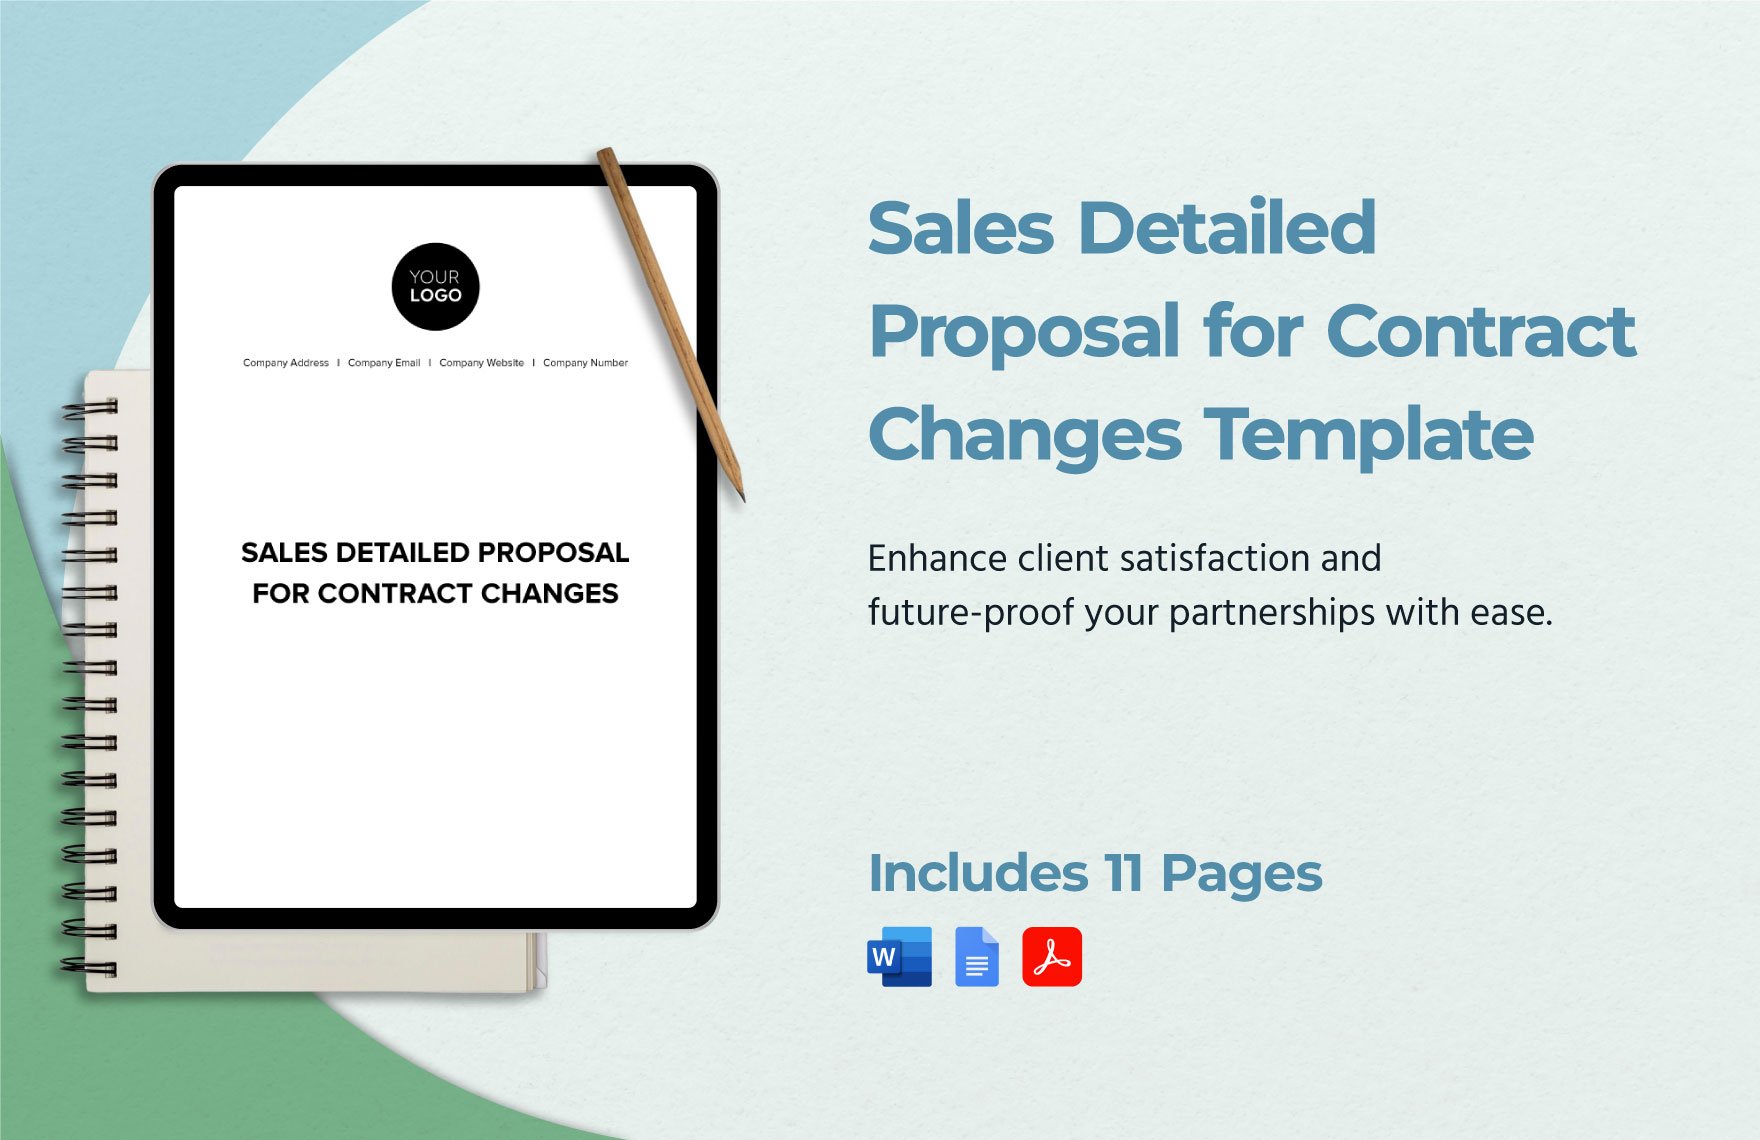 Sales Detailed Proposal for Contract Changes Template